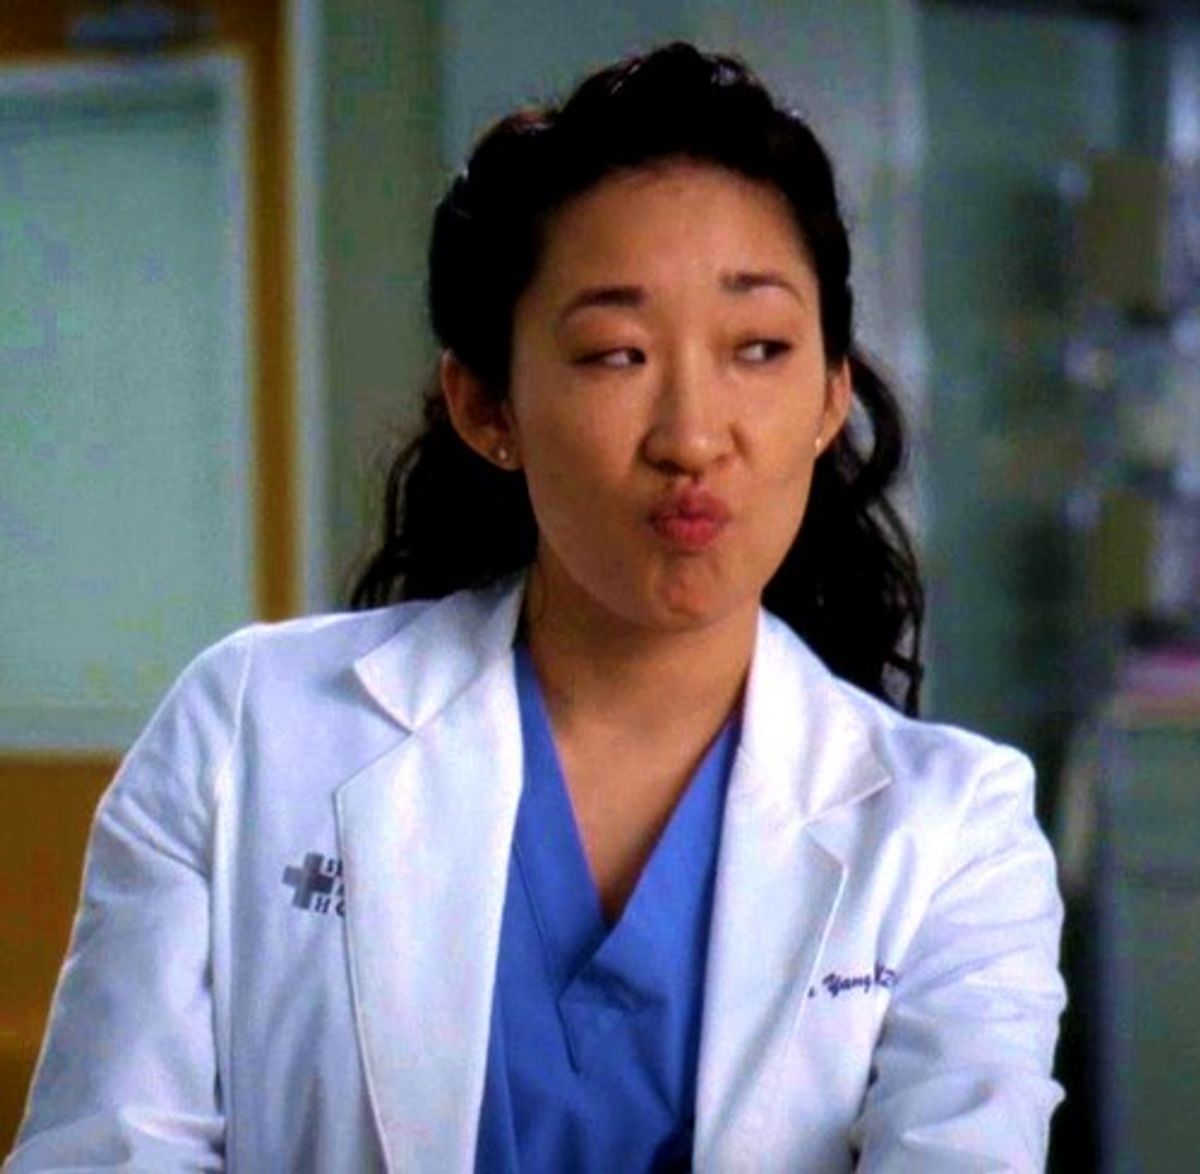 36 Times Cristina Yang Related To College Students